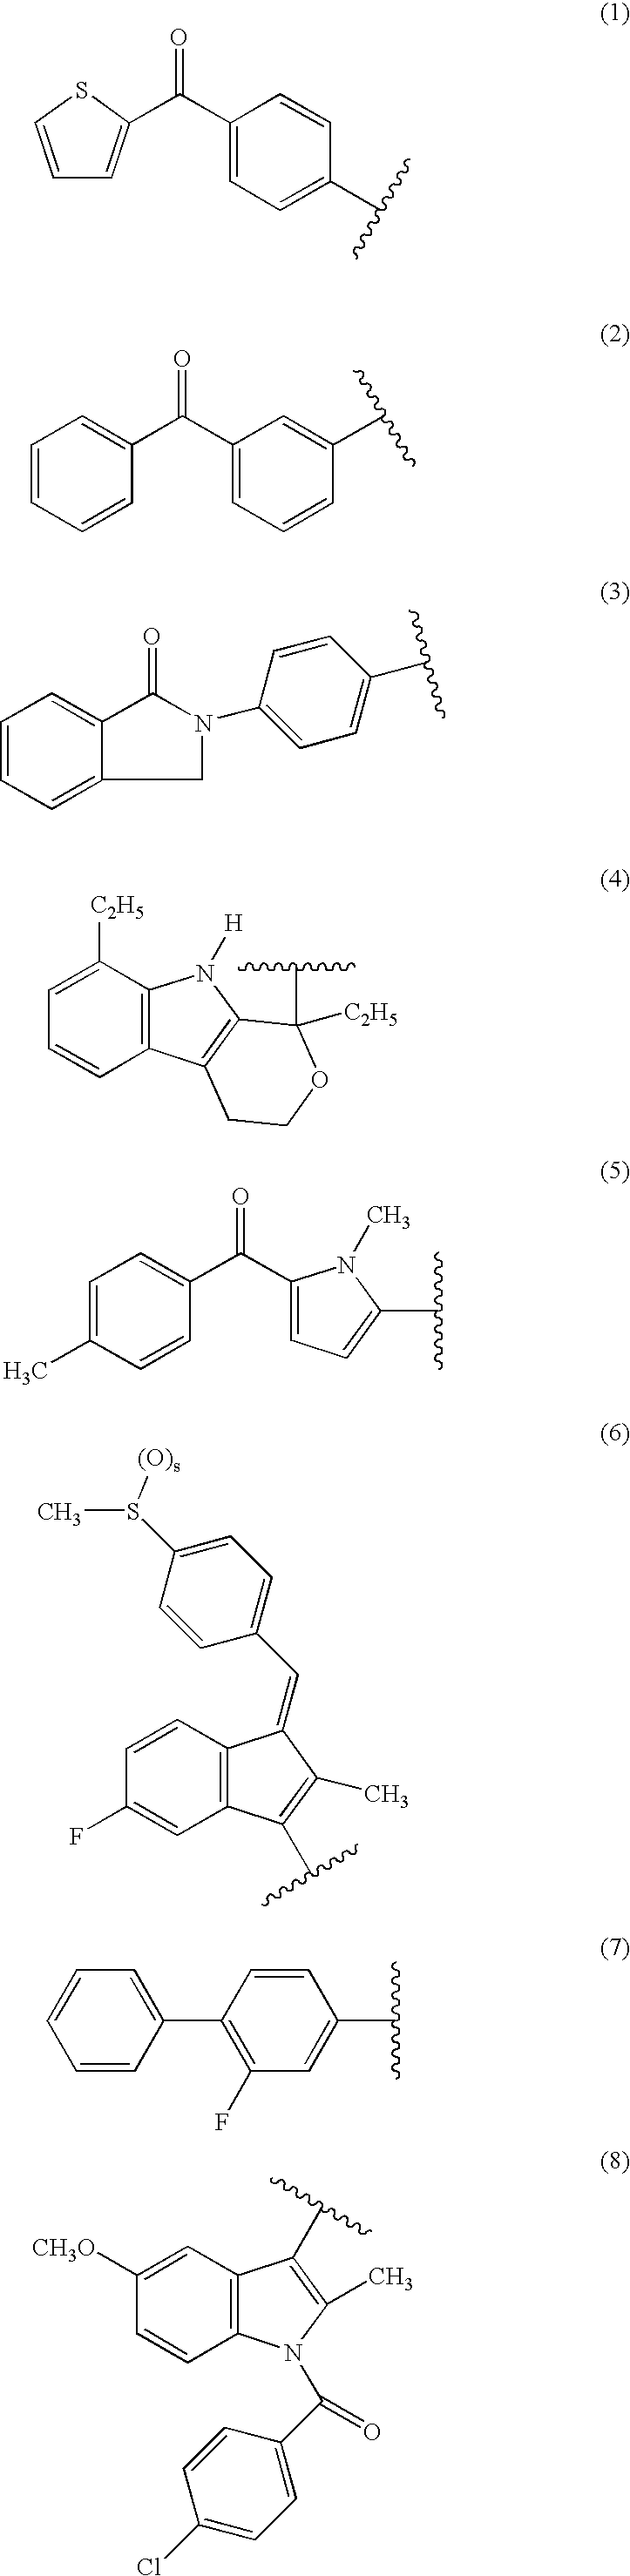 Nitrosated nonsteroidal antiinflammatory compounds, compositions and methods of use